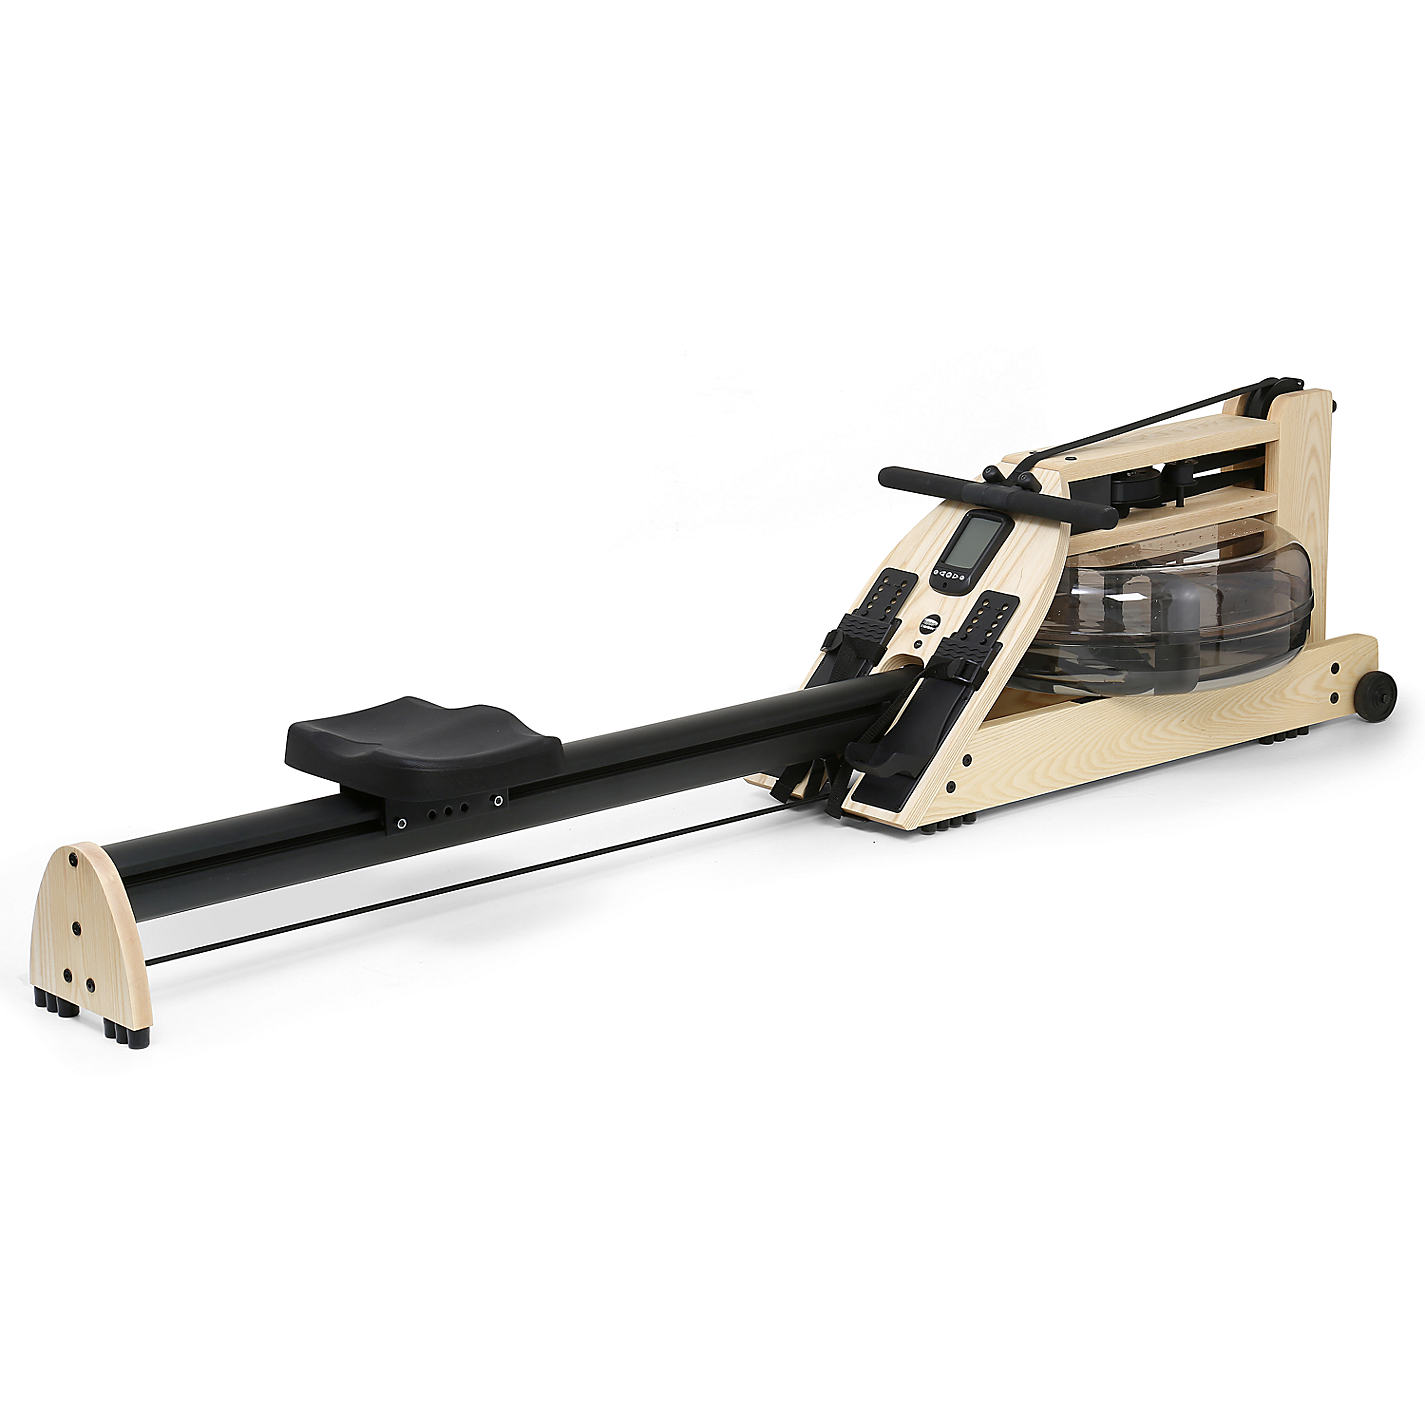 WATERROWER A1 STUDIO ROWING MACHINE WITH A1 MONITOR